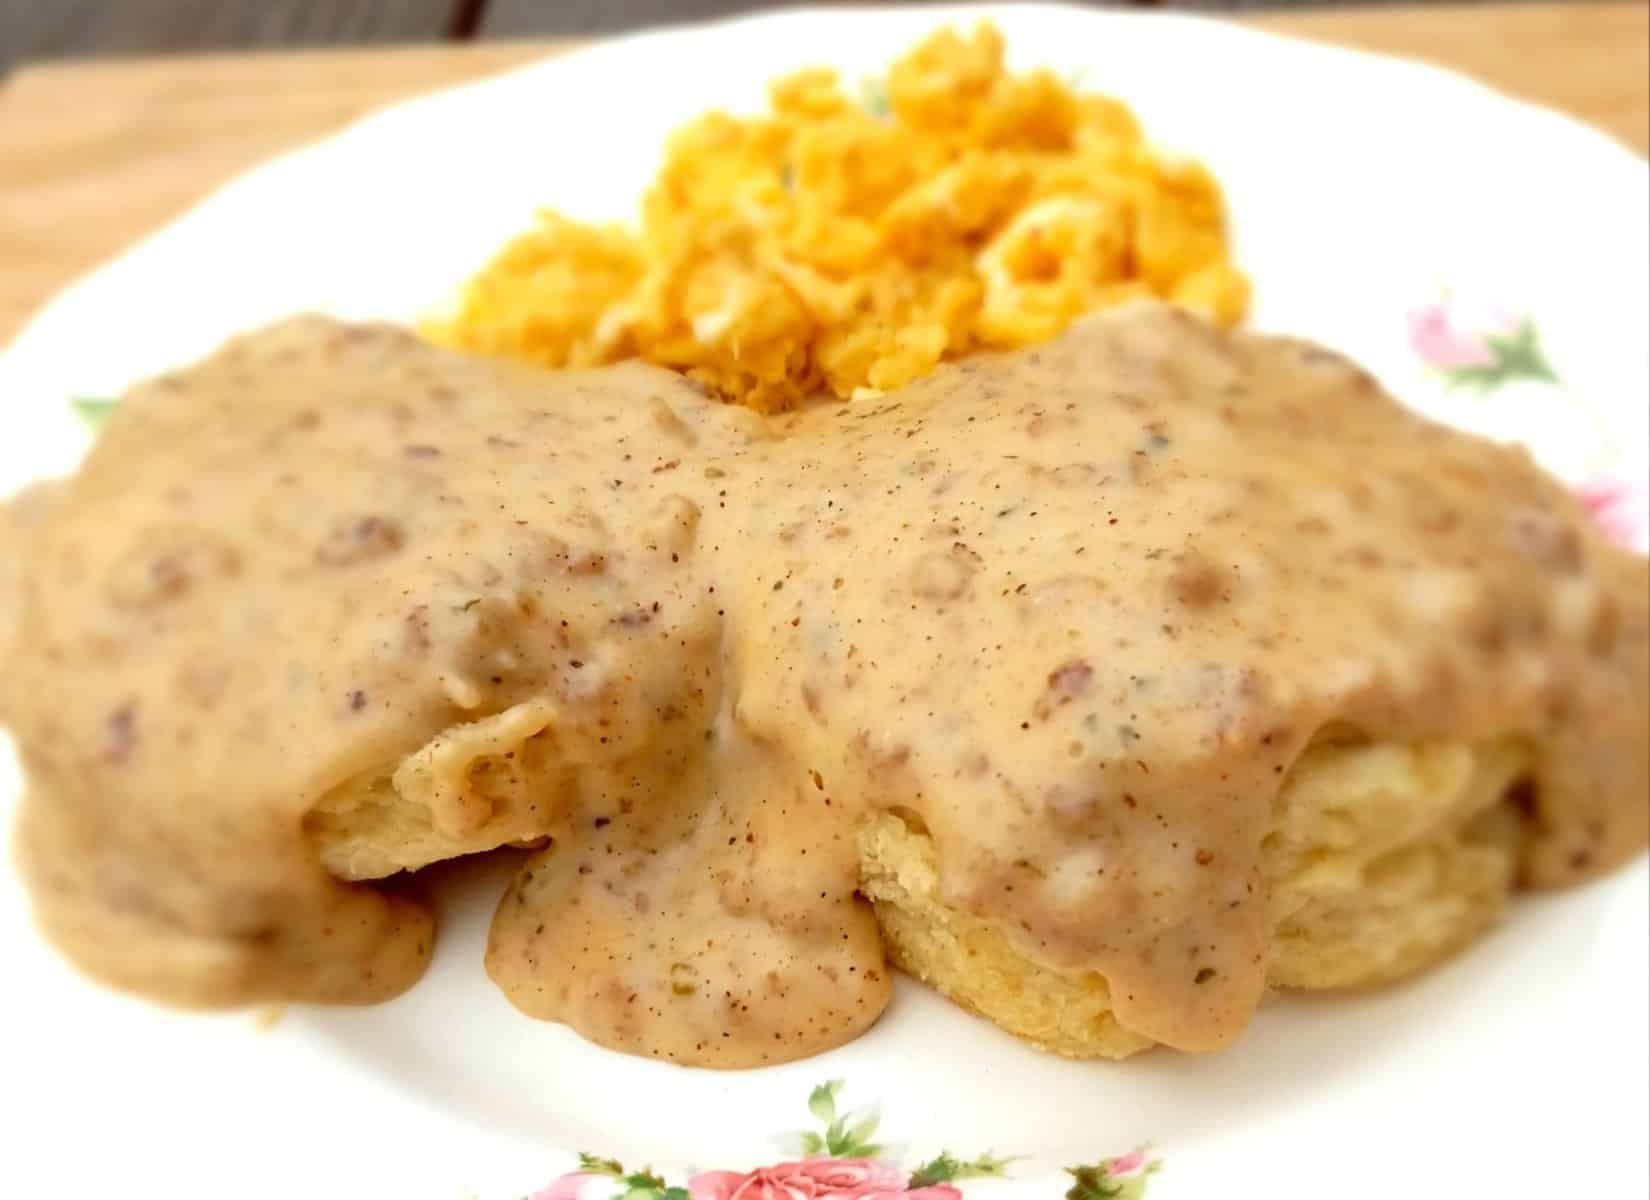 Breakfast plate with biscuits and gravy